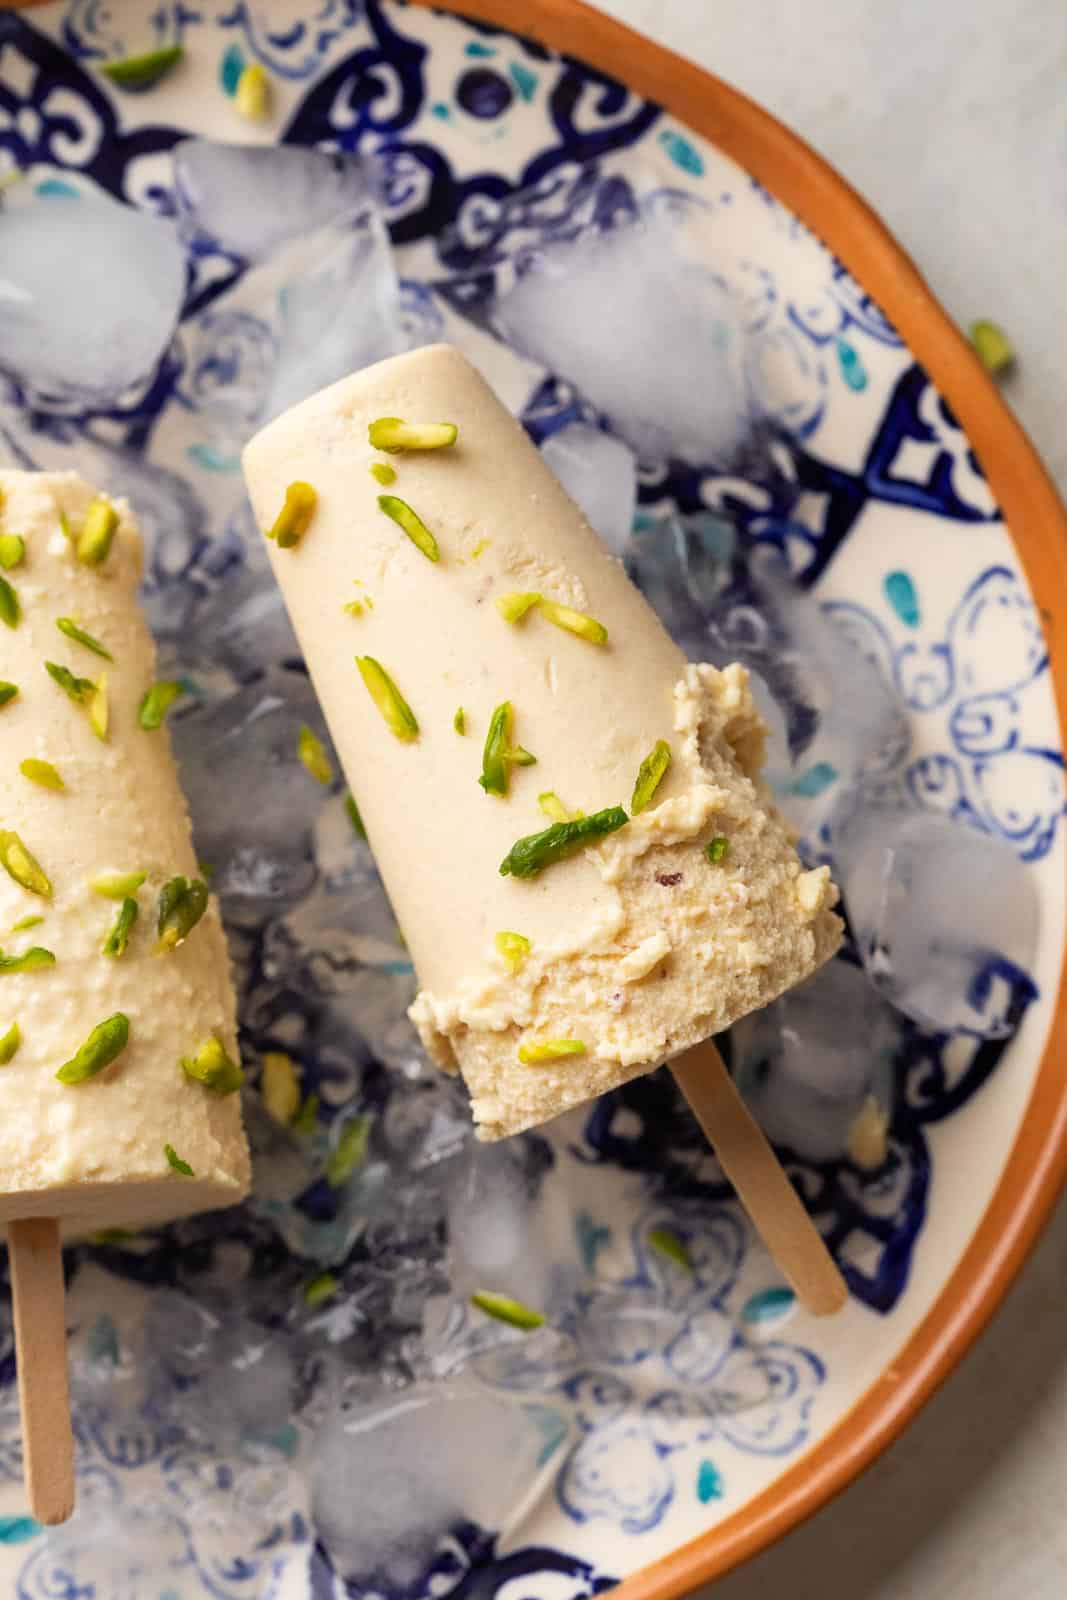 Badam Pista Kulfi served on a plate with some ice to keep it frozen